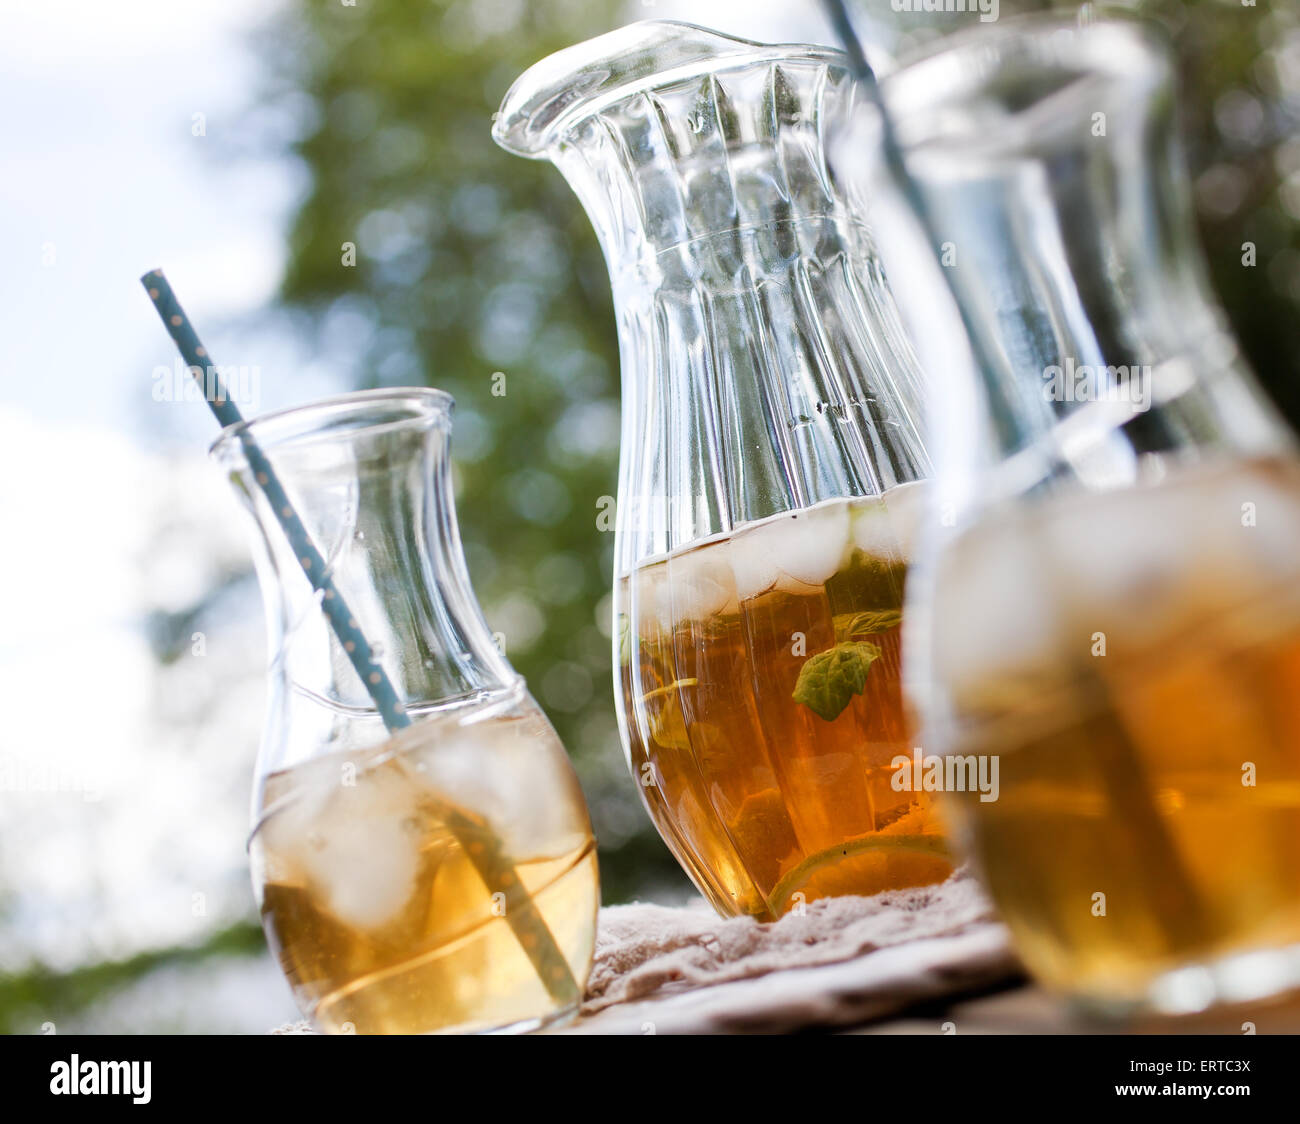 Ice tea with mint leaves Stock Photo